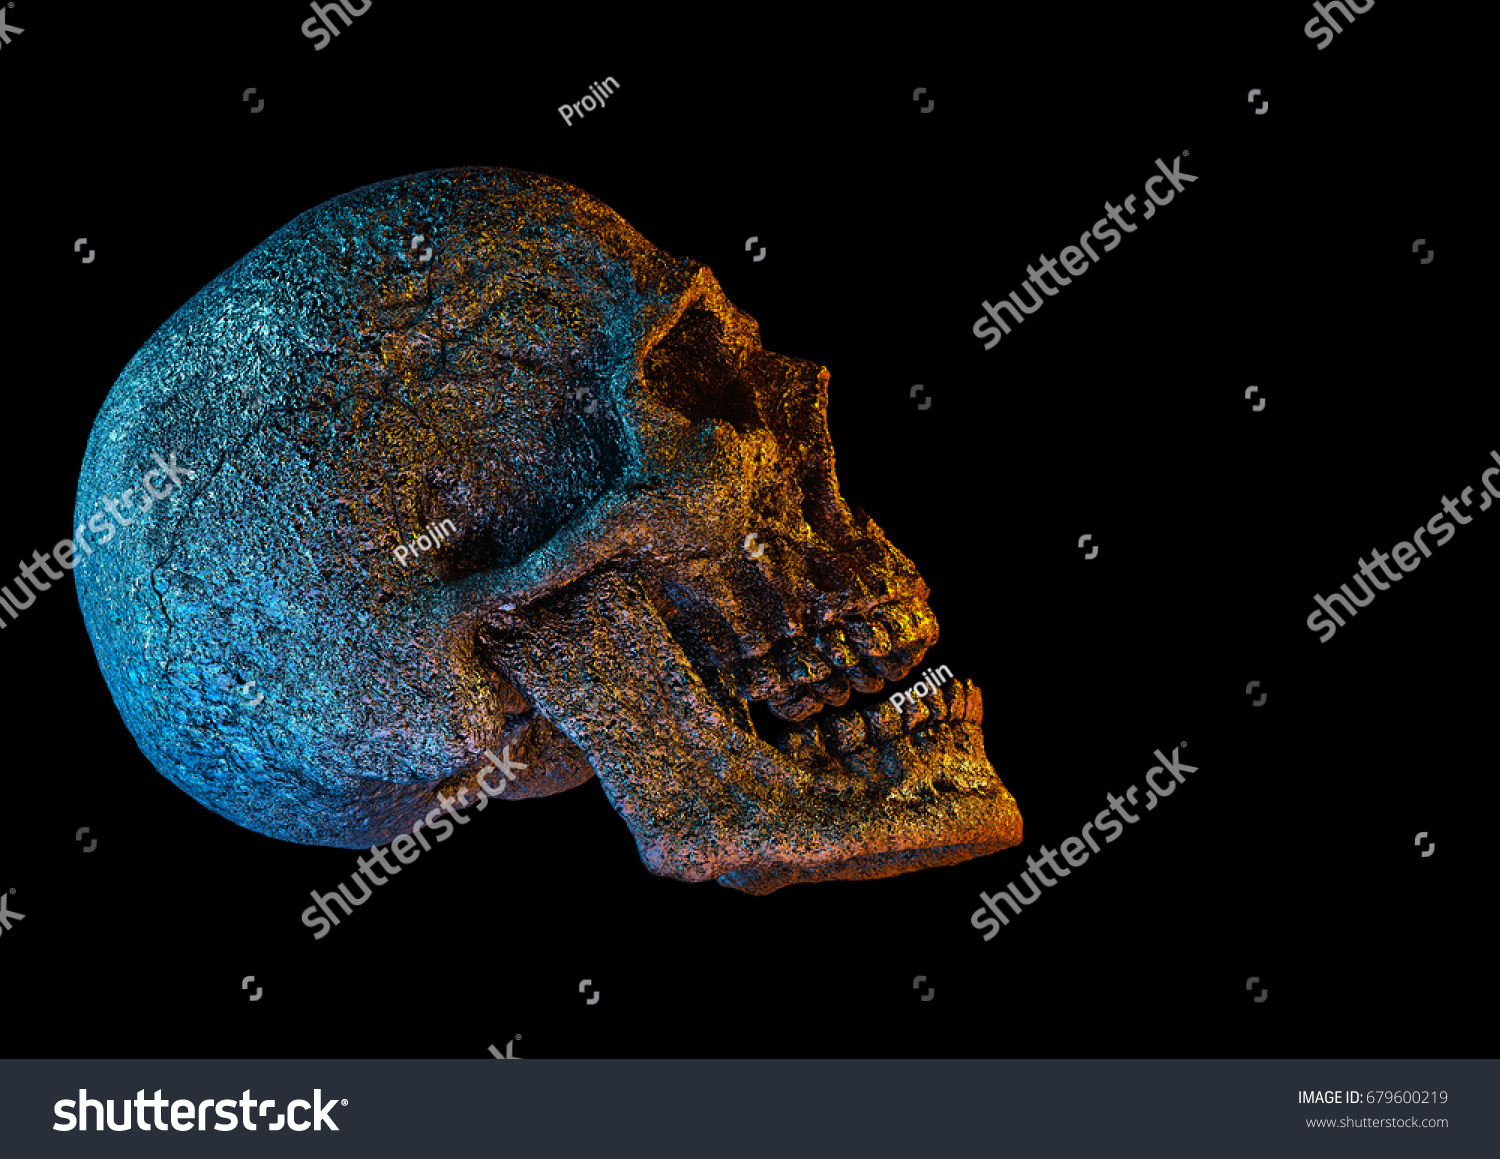 Human Scary Skull Locally Deformed in Rich colors in to the Black Background. Concept of death, horror. Spooky Halloween Symbol. Illustration of 3D rendering. #679600219